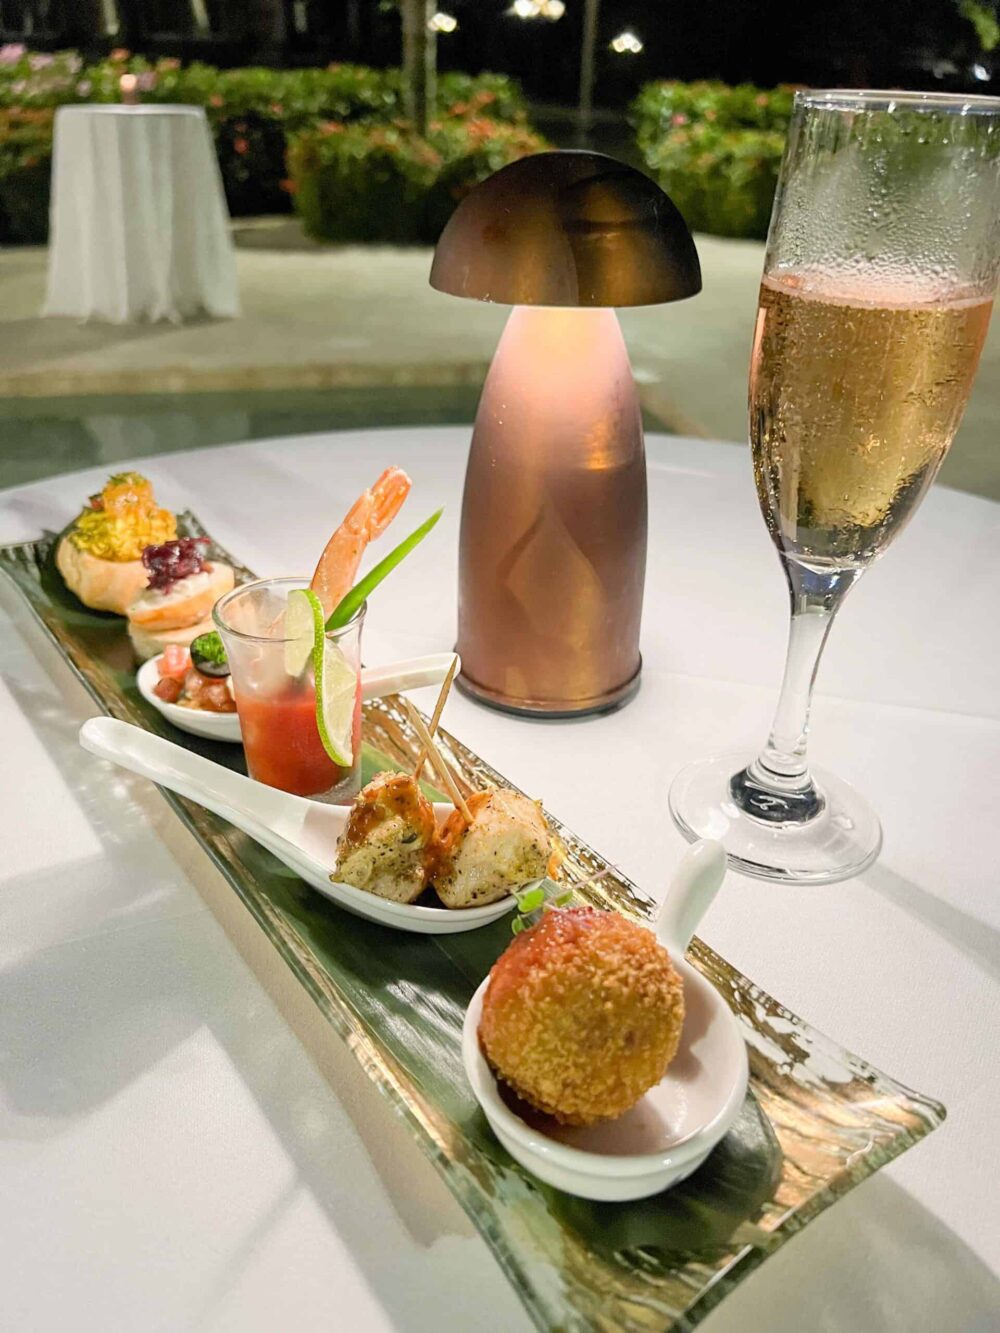 Fancy appetizers and champagne at Sandals Grande Antigua.